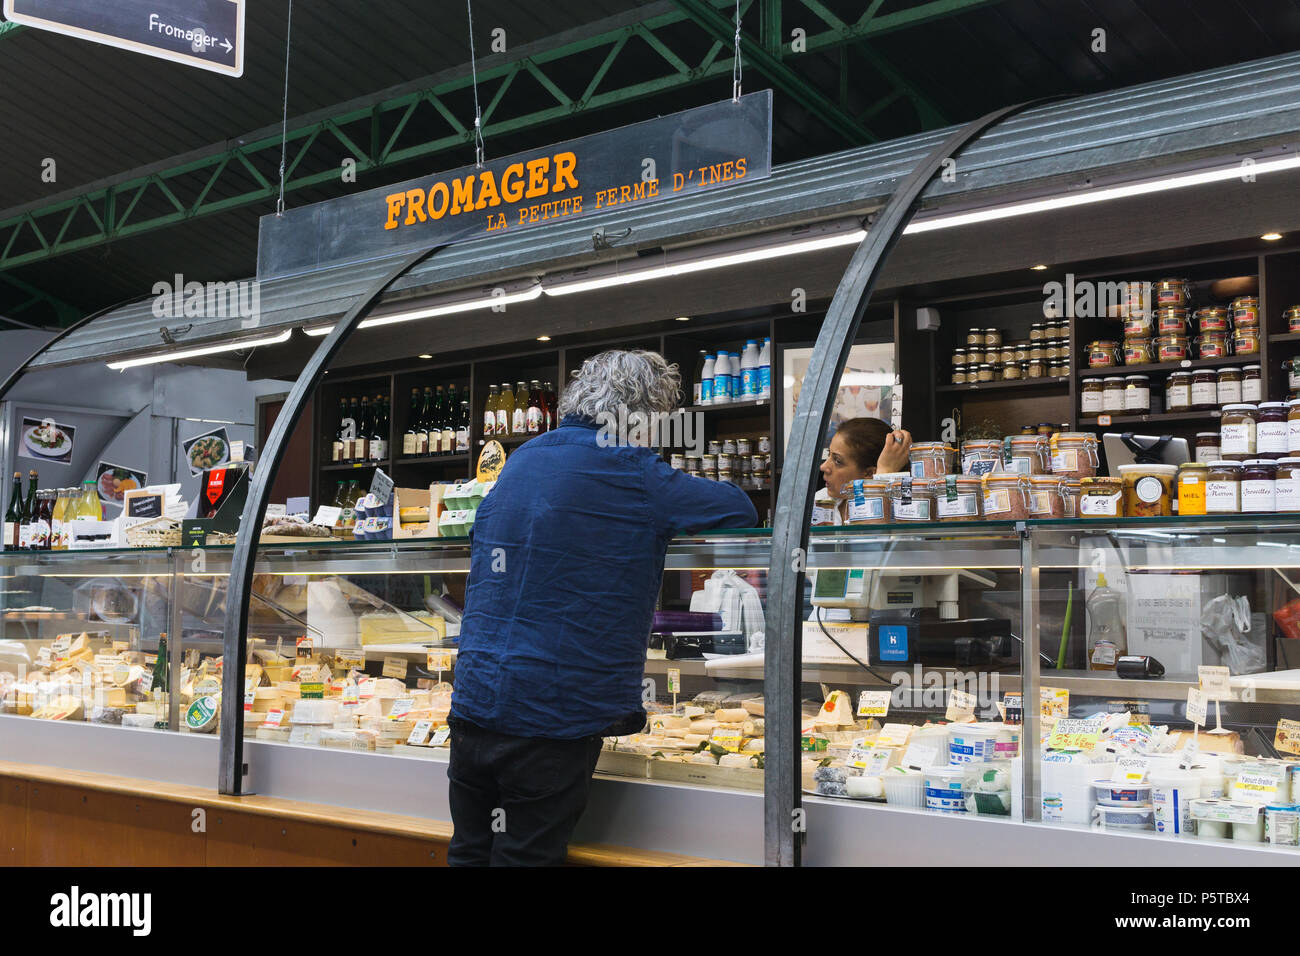 Cheese for sale in a Paris cheese shop (fromagerie) at the Enfants Rouges market, France. Stock Photo